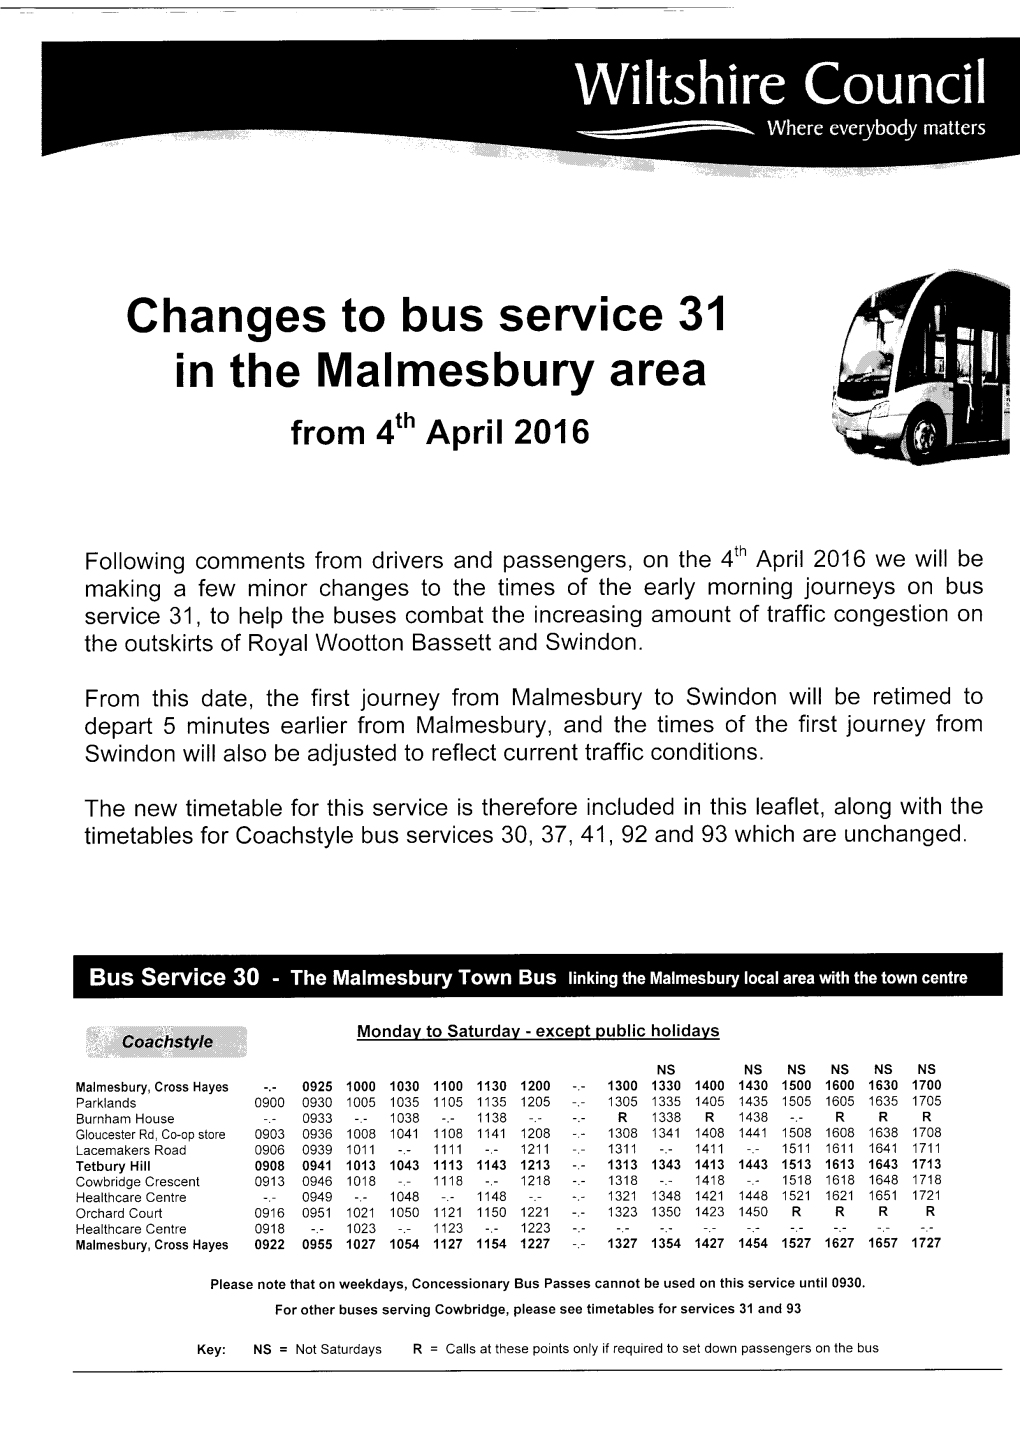 Changes to Bus Service 31 in the Malmesbury Area from 4Tn Ap Ril 2016